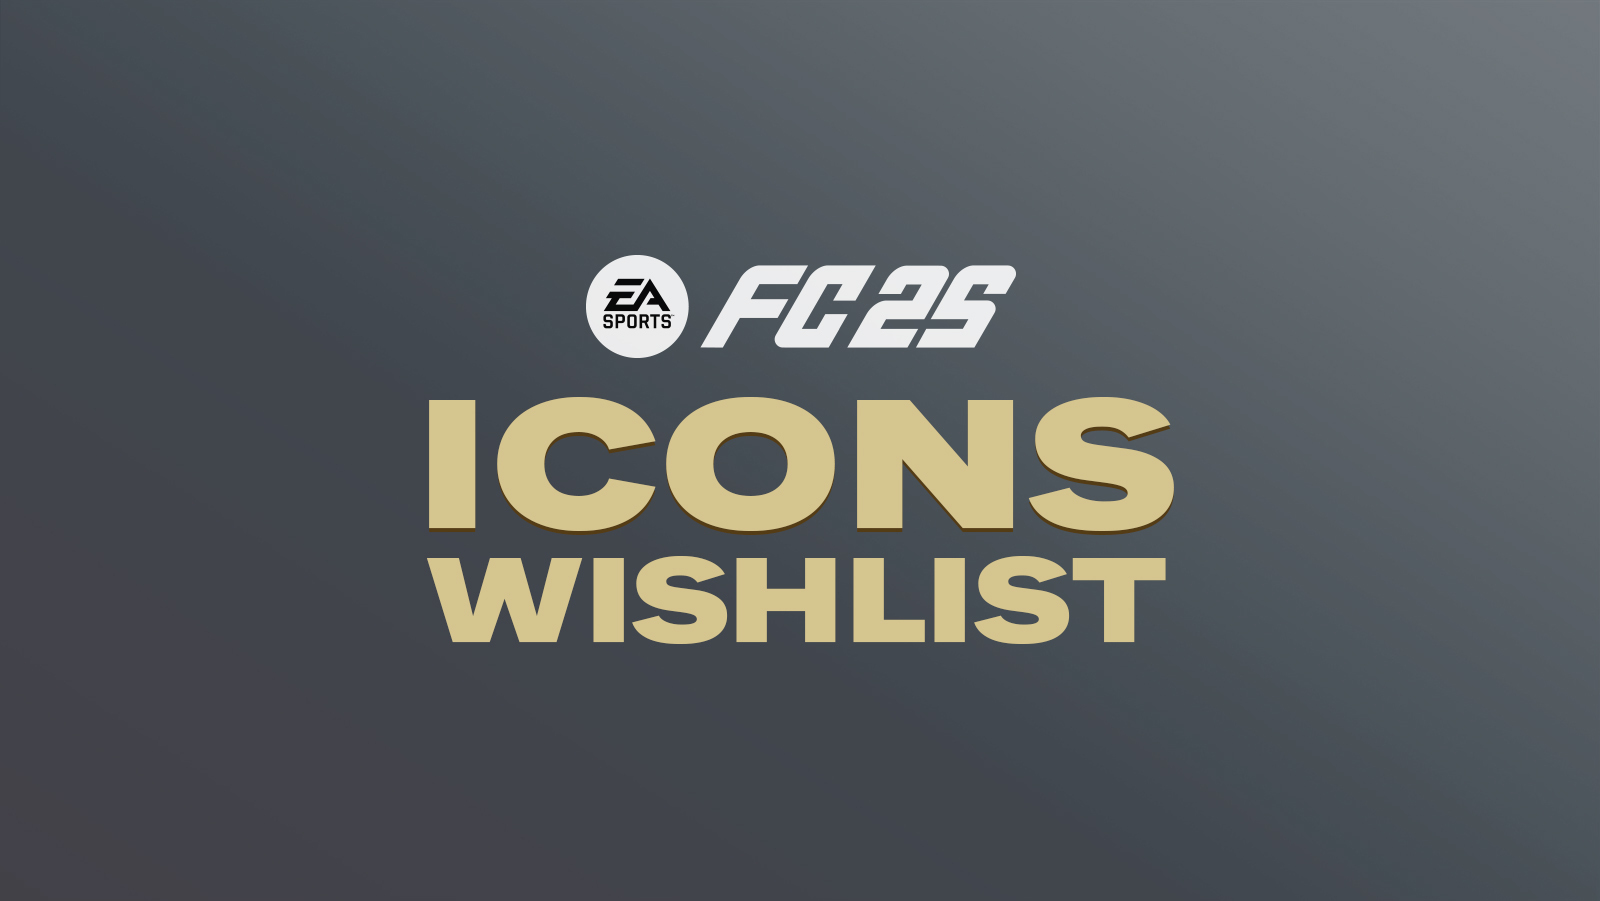 Vote for new EA Sports FC 25 Icons and list your wishlist here.